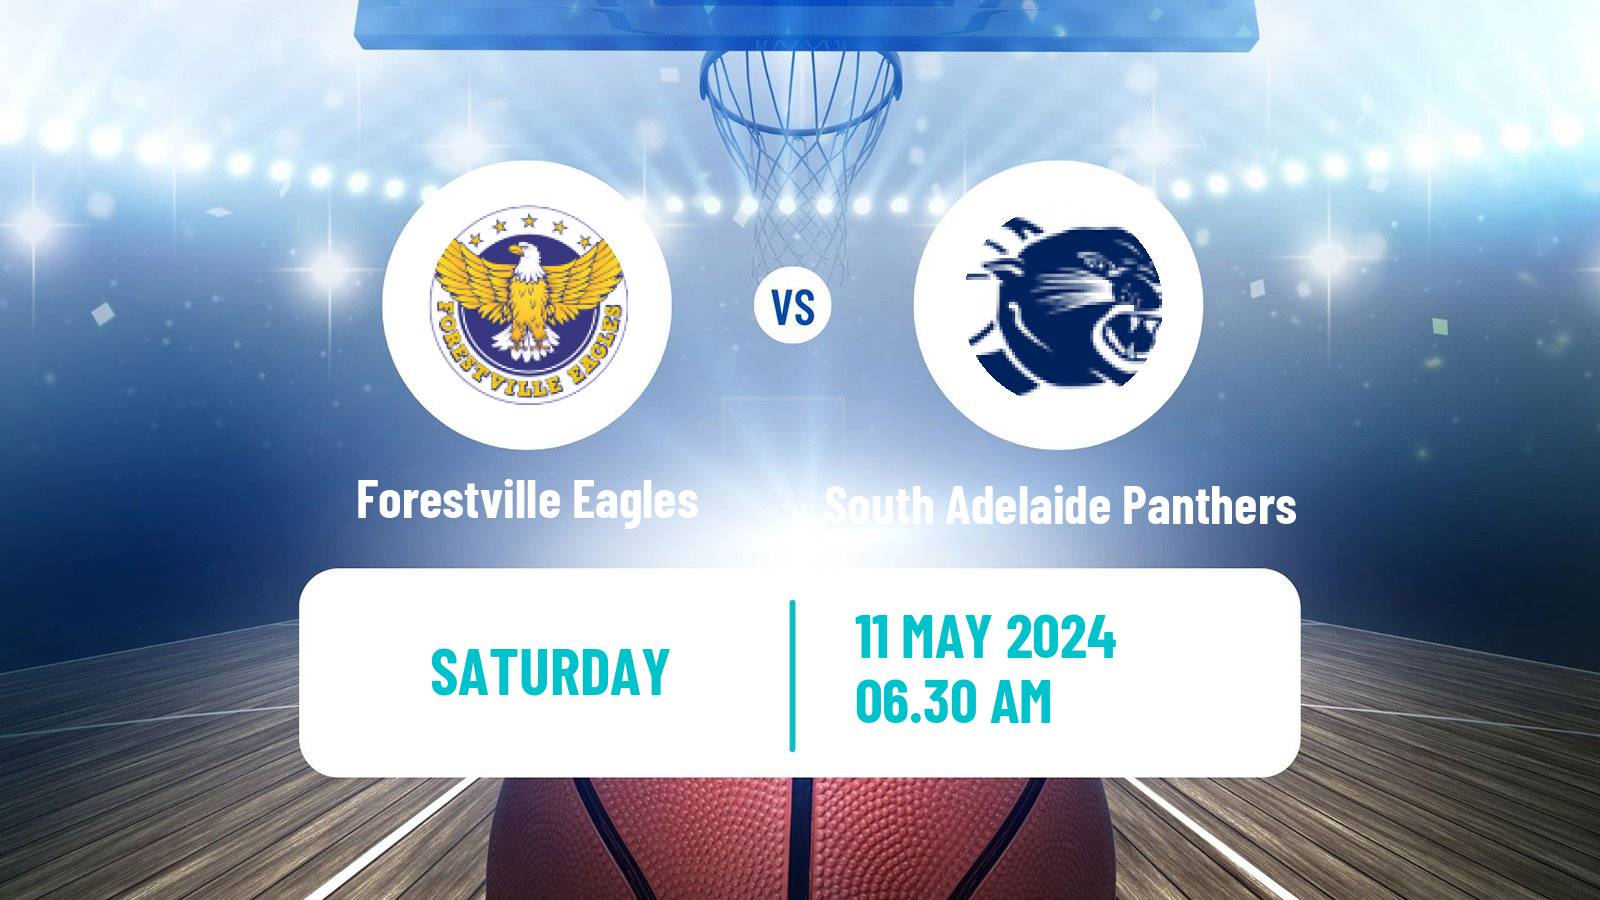 Basketball Australian NBL1 Central Forestville Eagles - South Adelaide Panthers